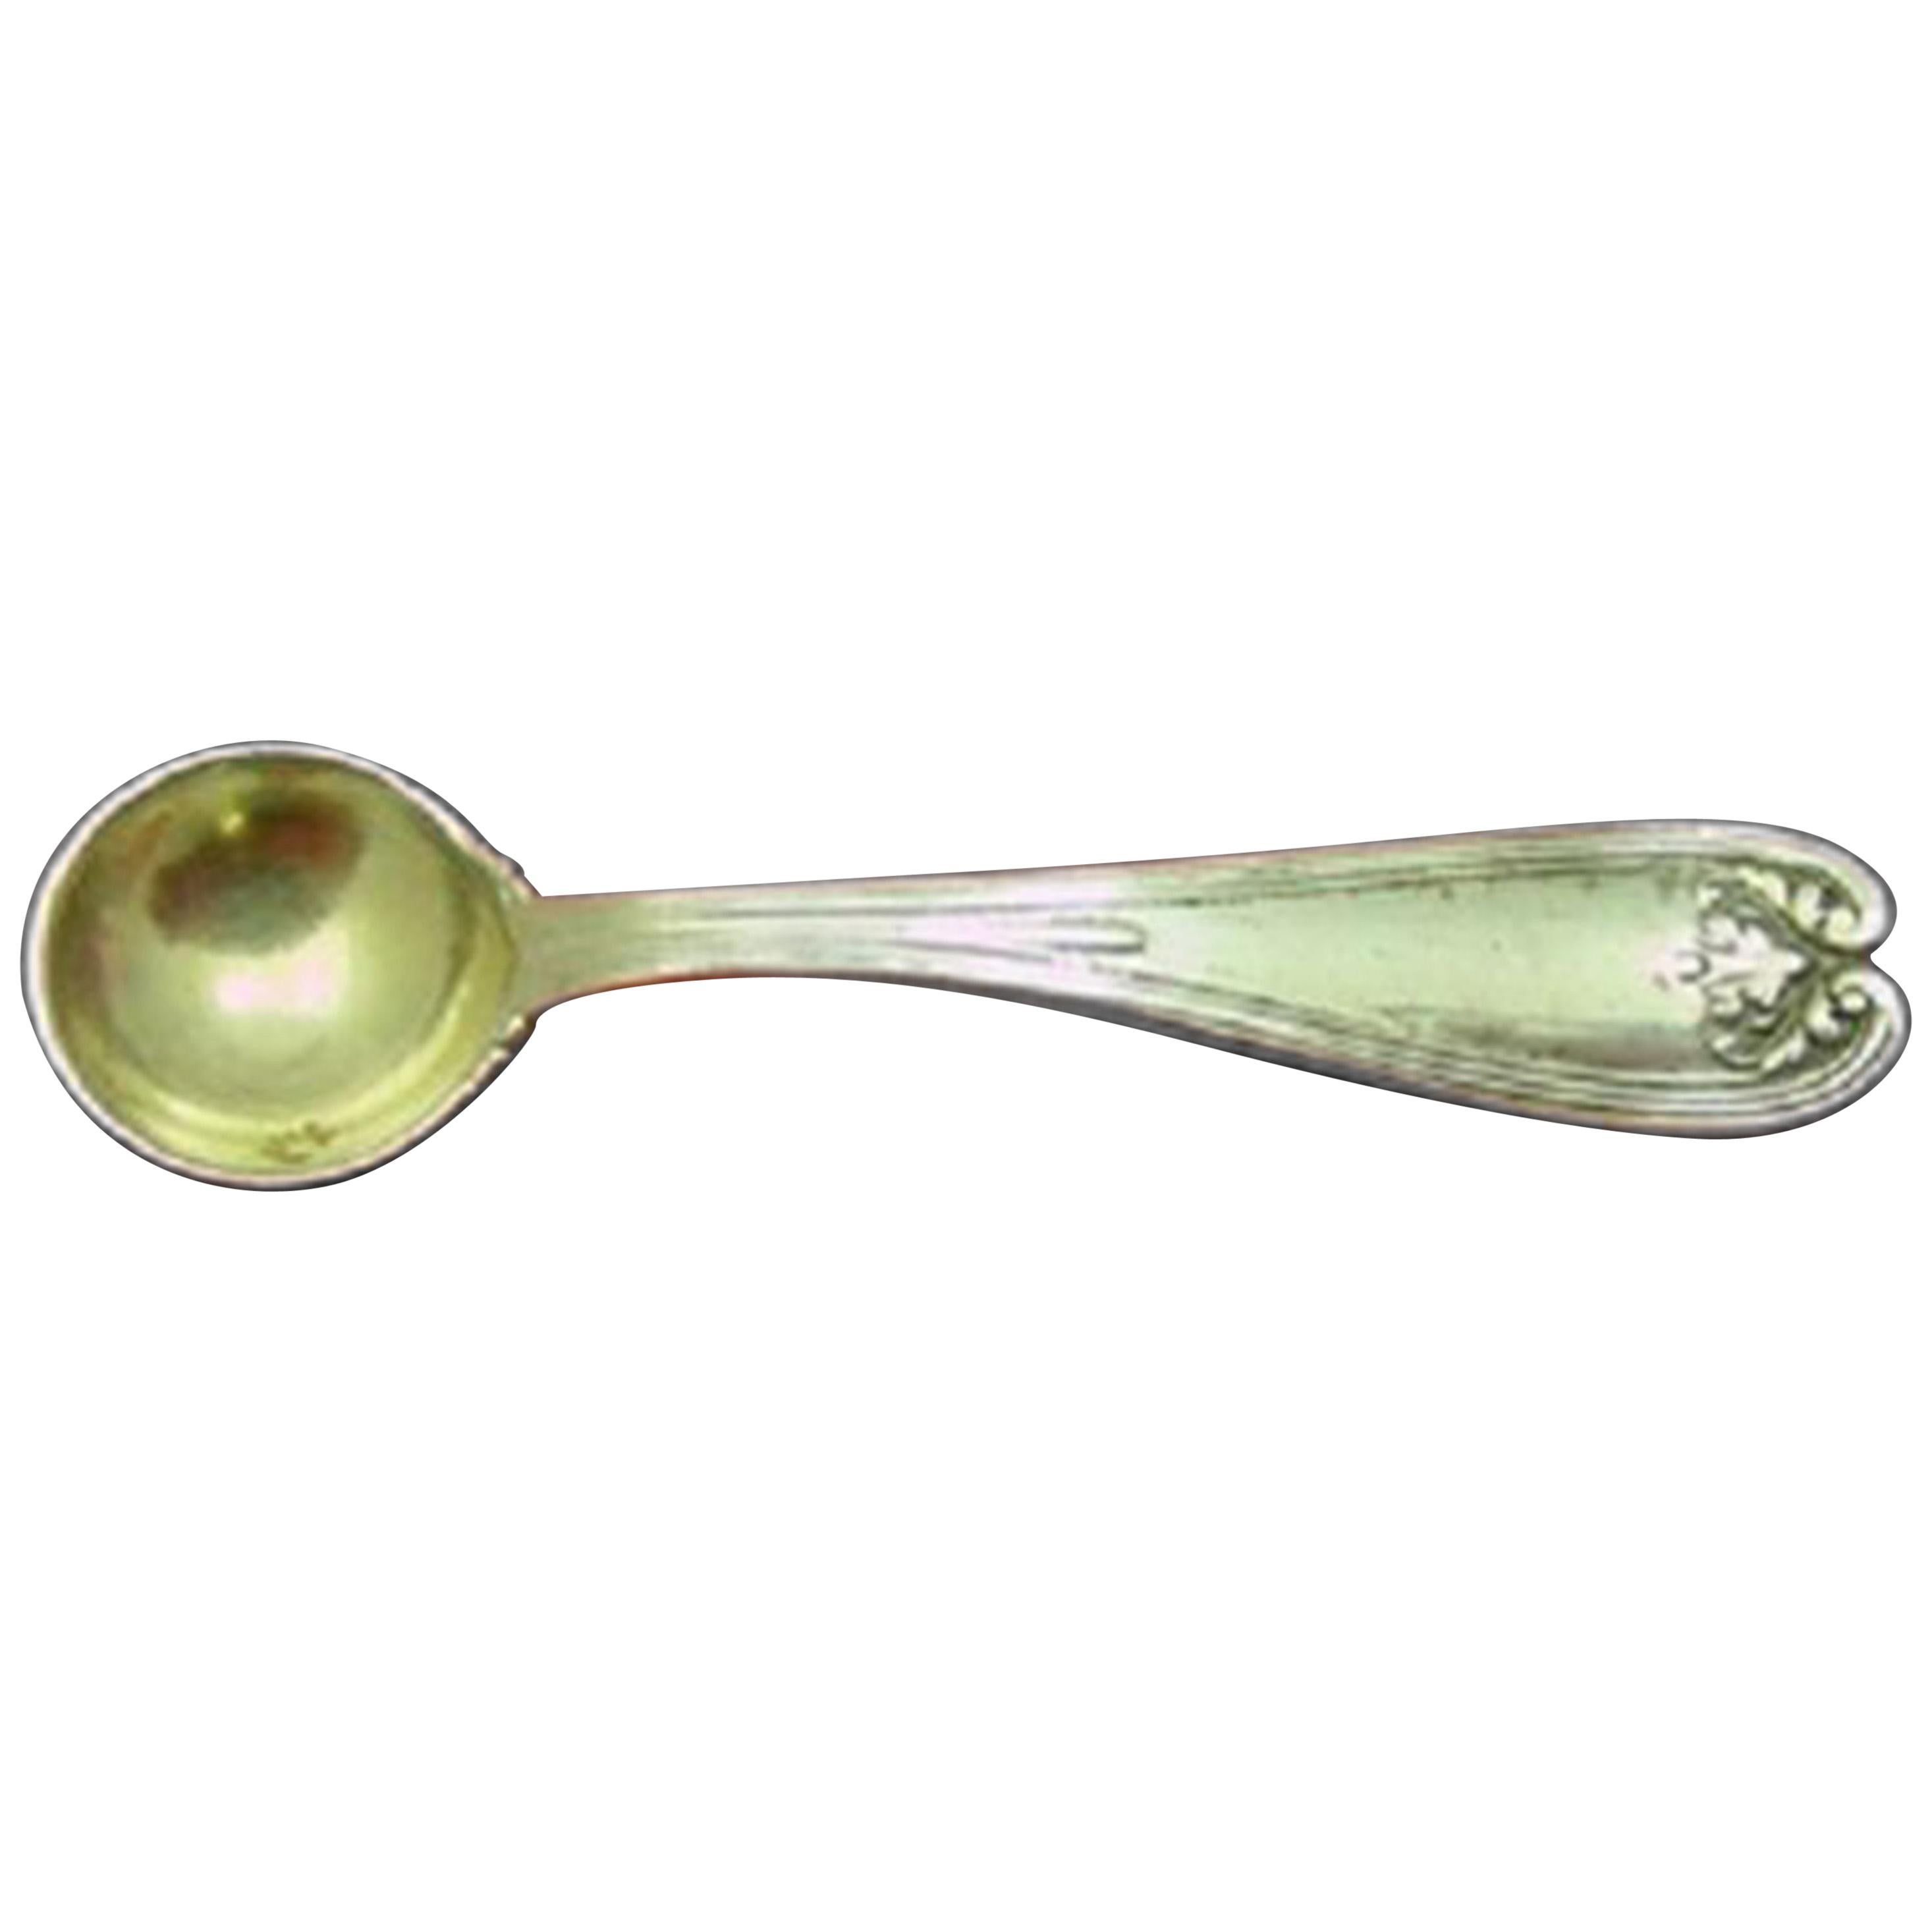 Colonial by Tiffany & Co. Sterling Silver Salt Spoon Goldwashed